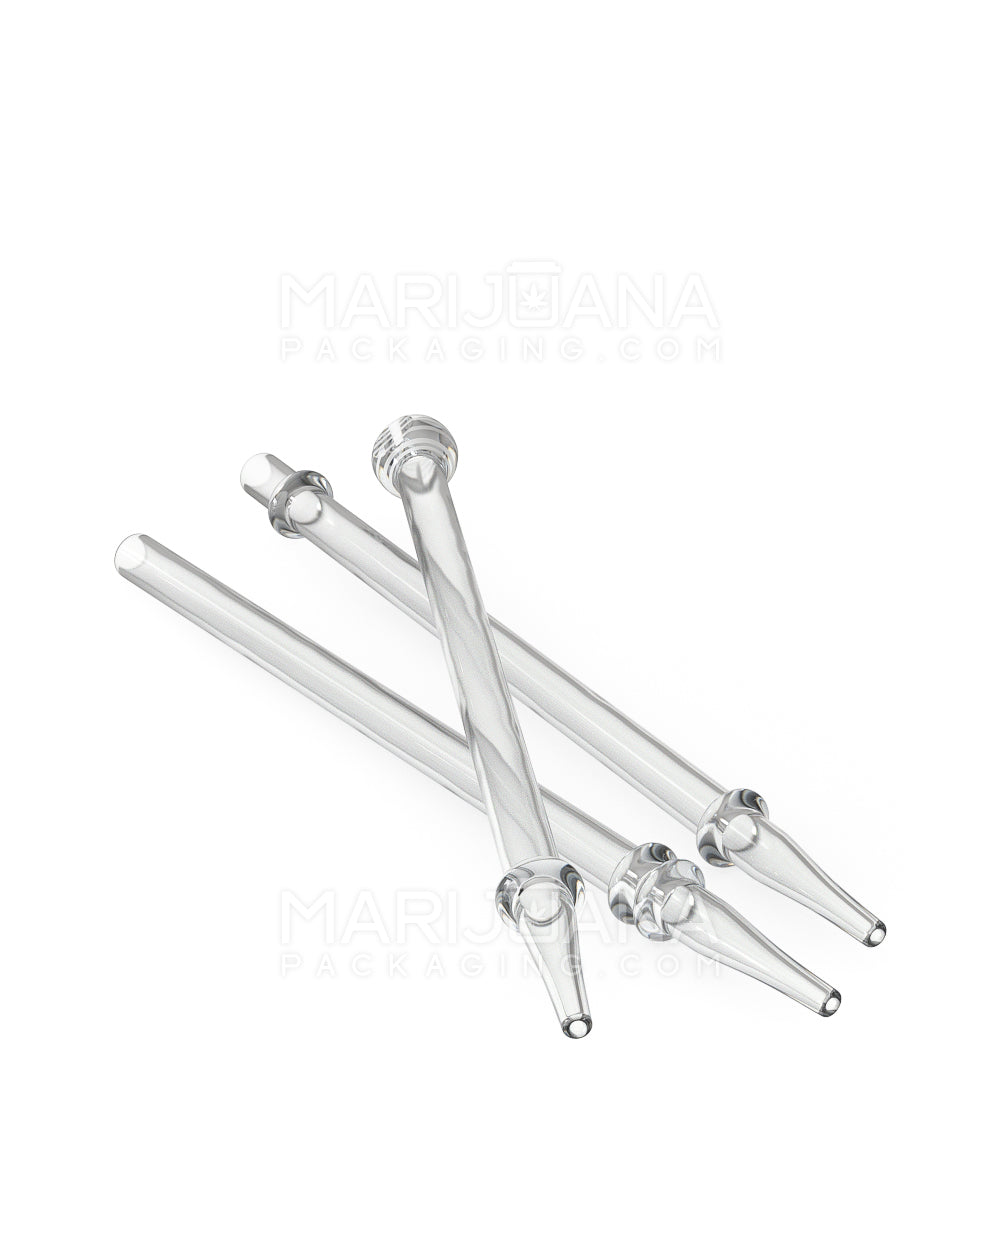 Assorted Mouthpiece Ringed Dab Straw | 6.5in Long - Glass - Clear - 10